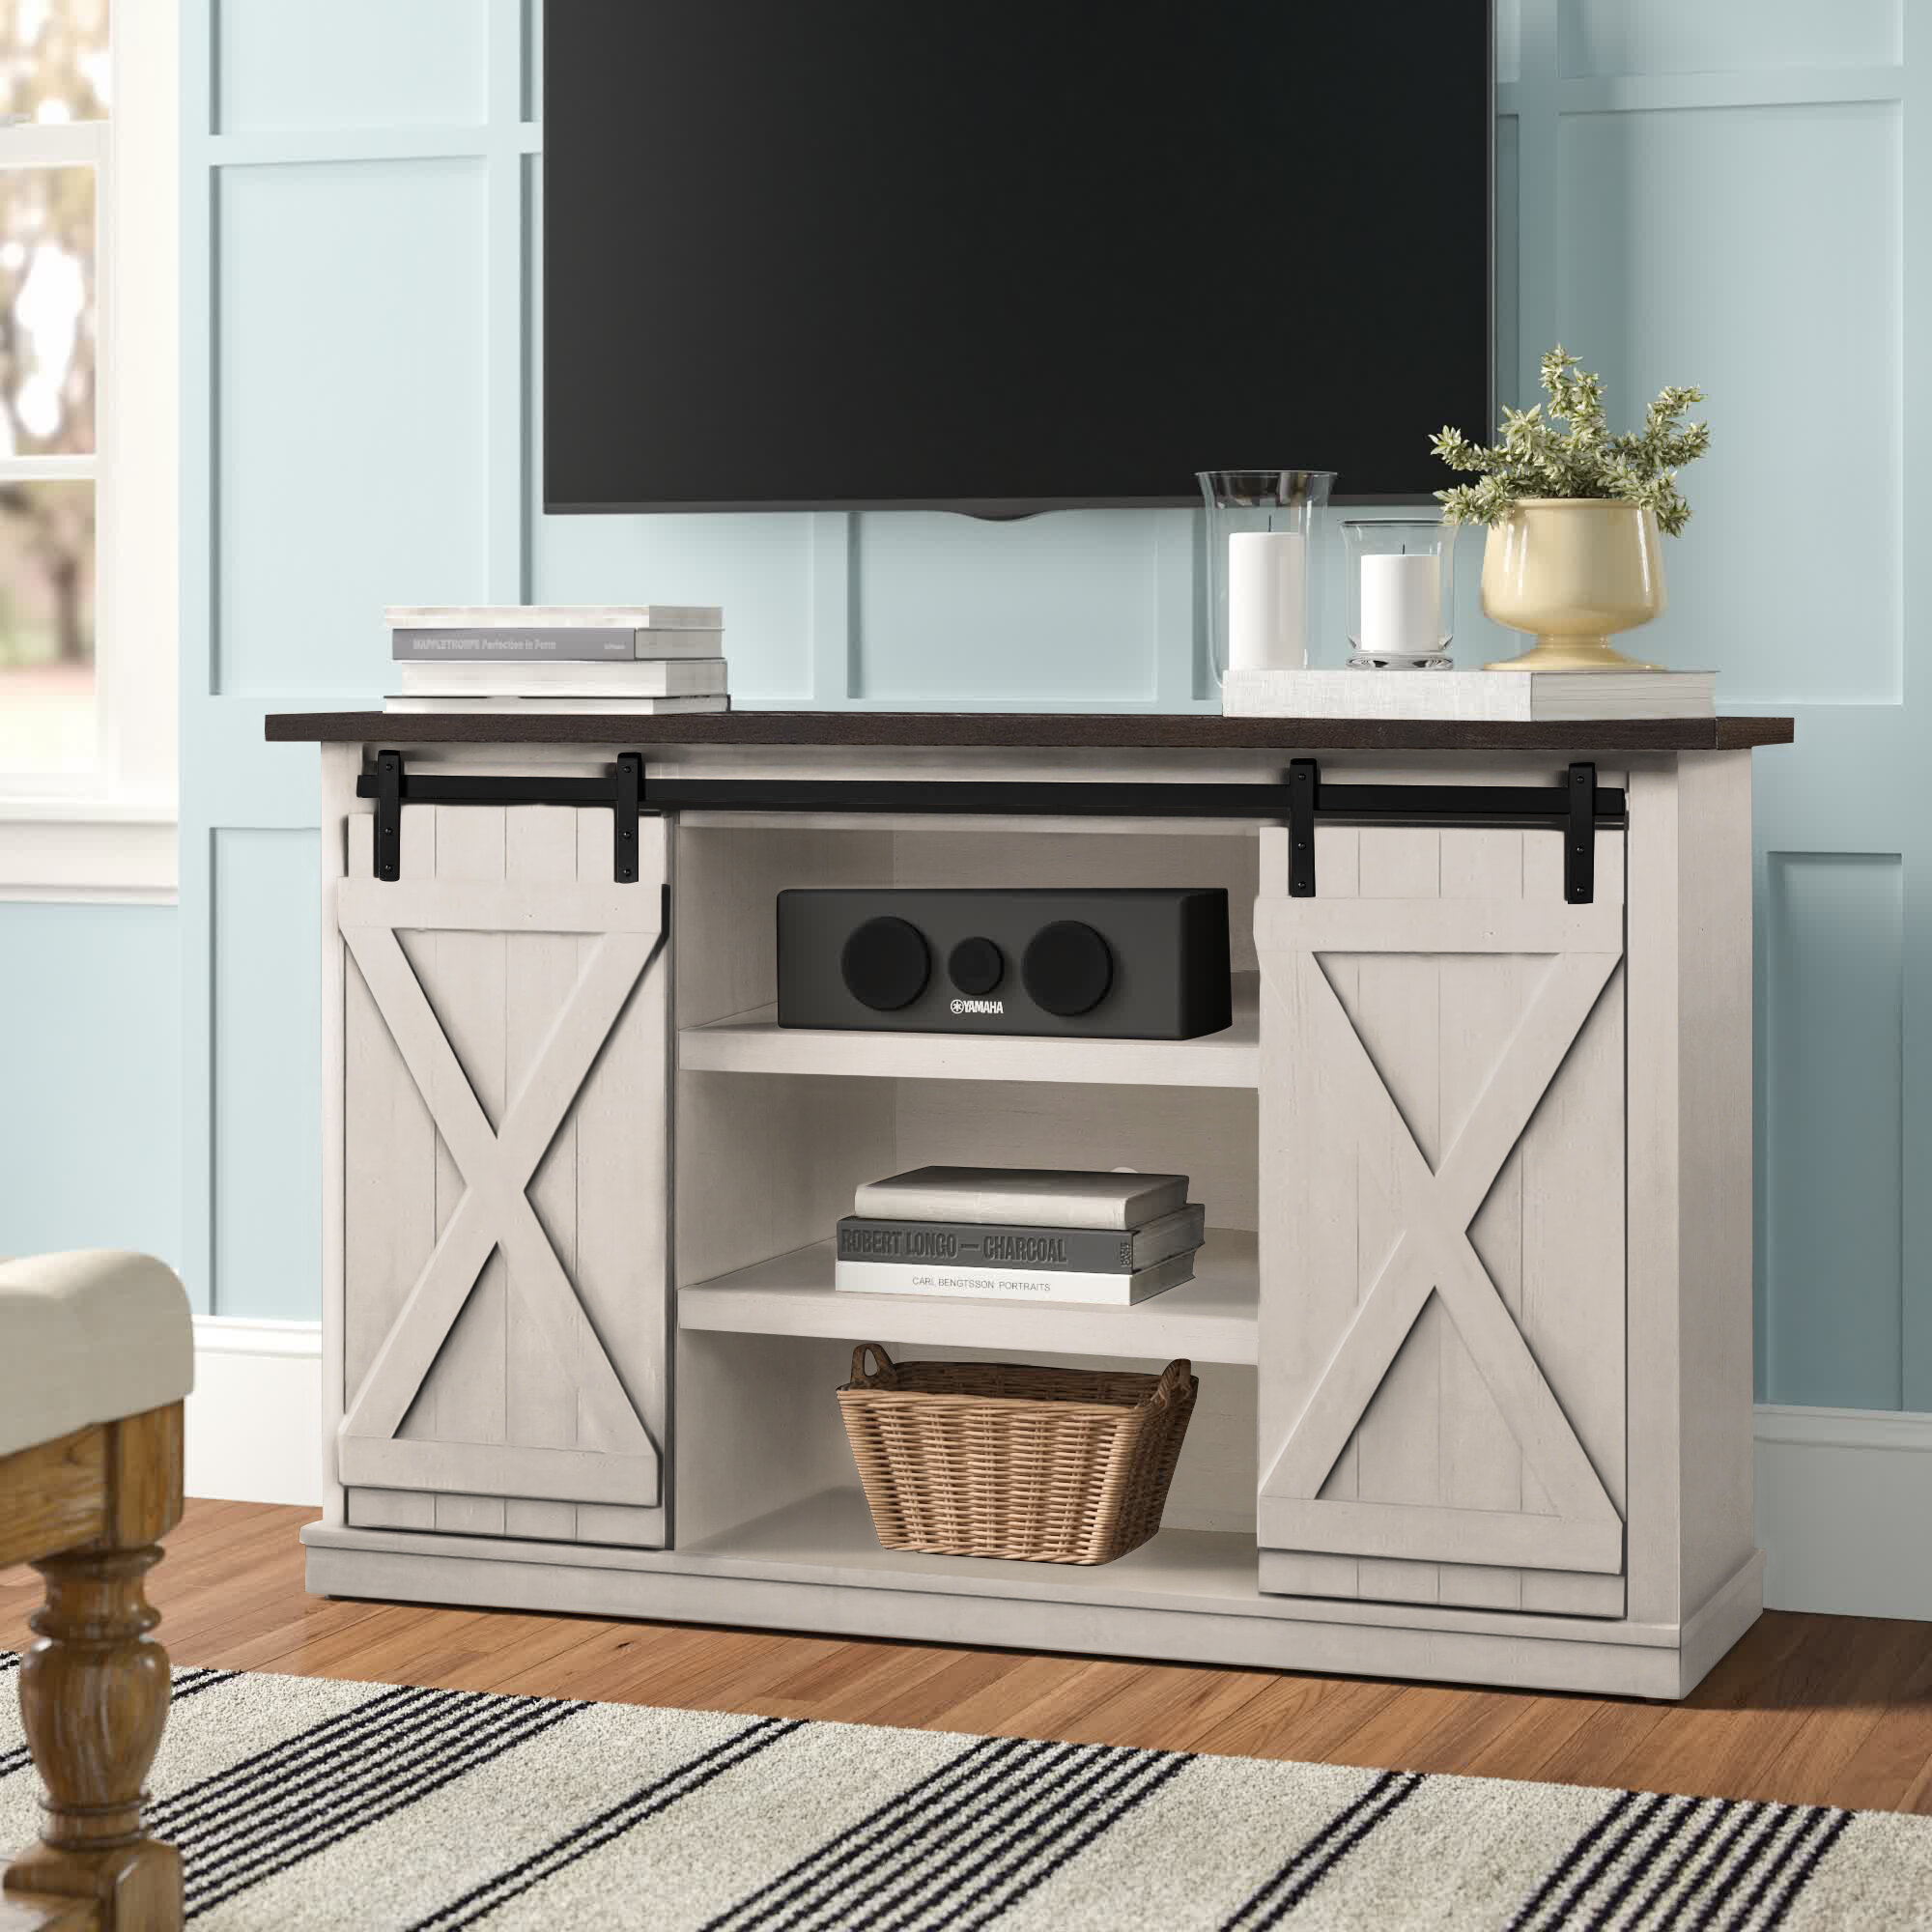 BOWERY HILL Wood Wall Mounted Floating Shelf 60 TV Stand Console in Distressed Gray 